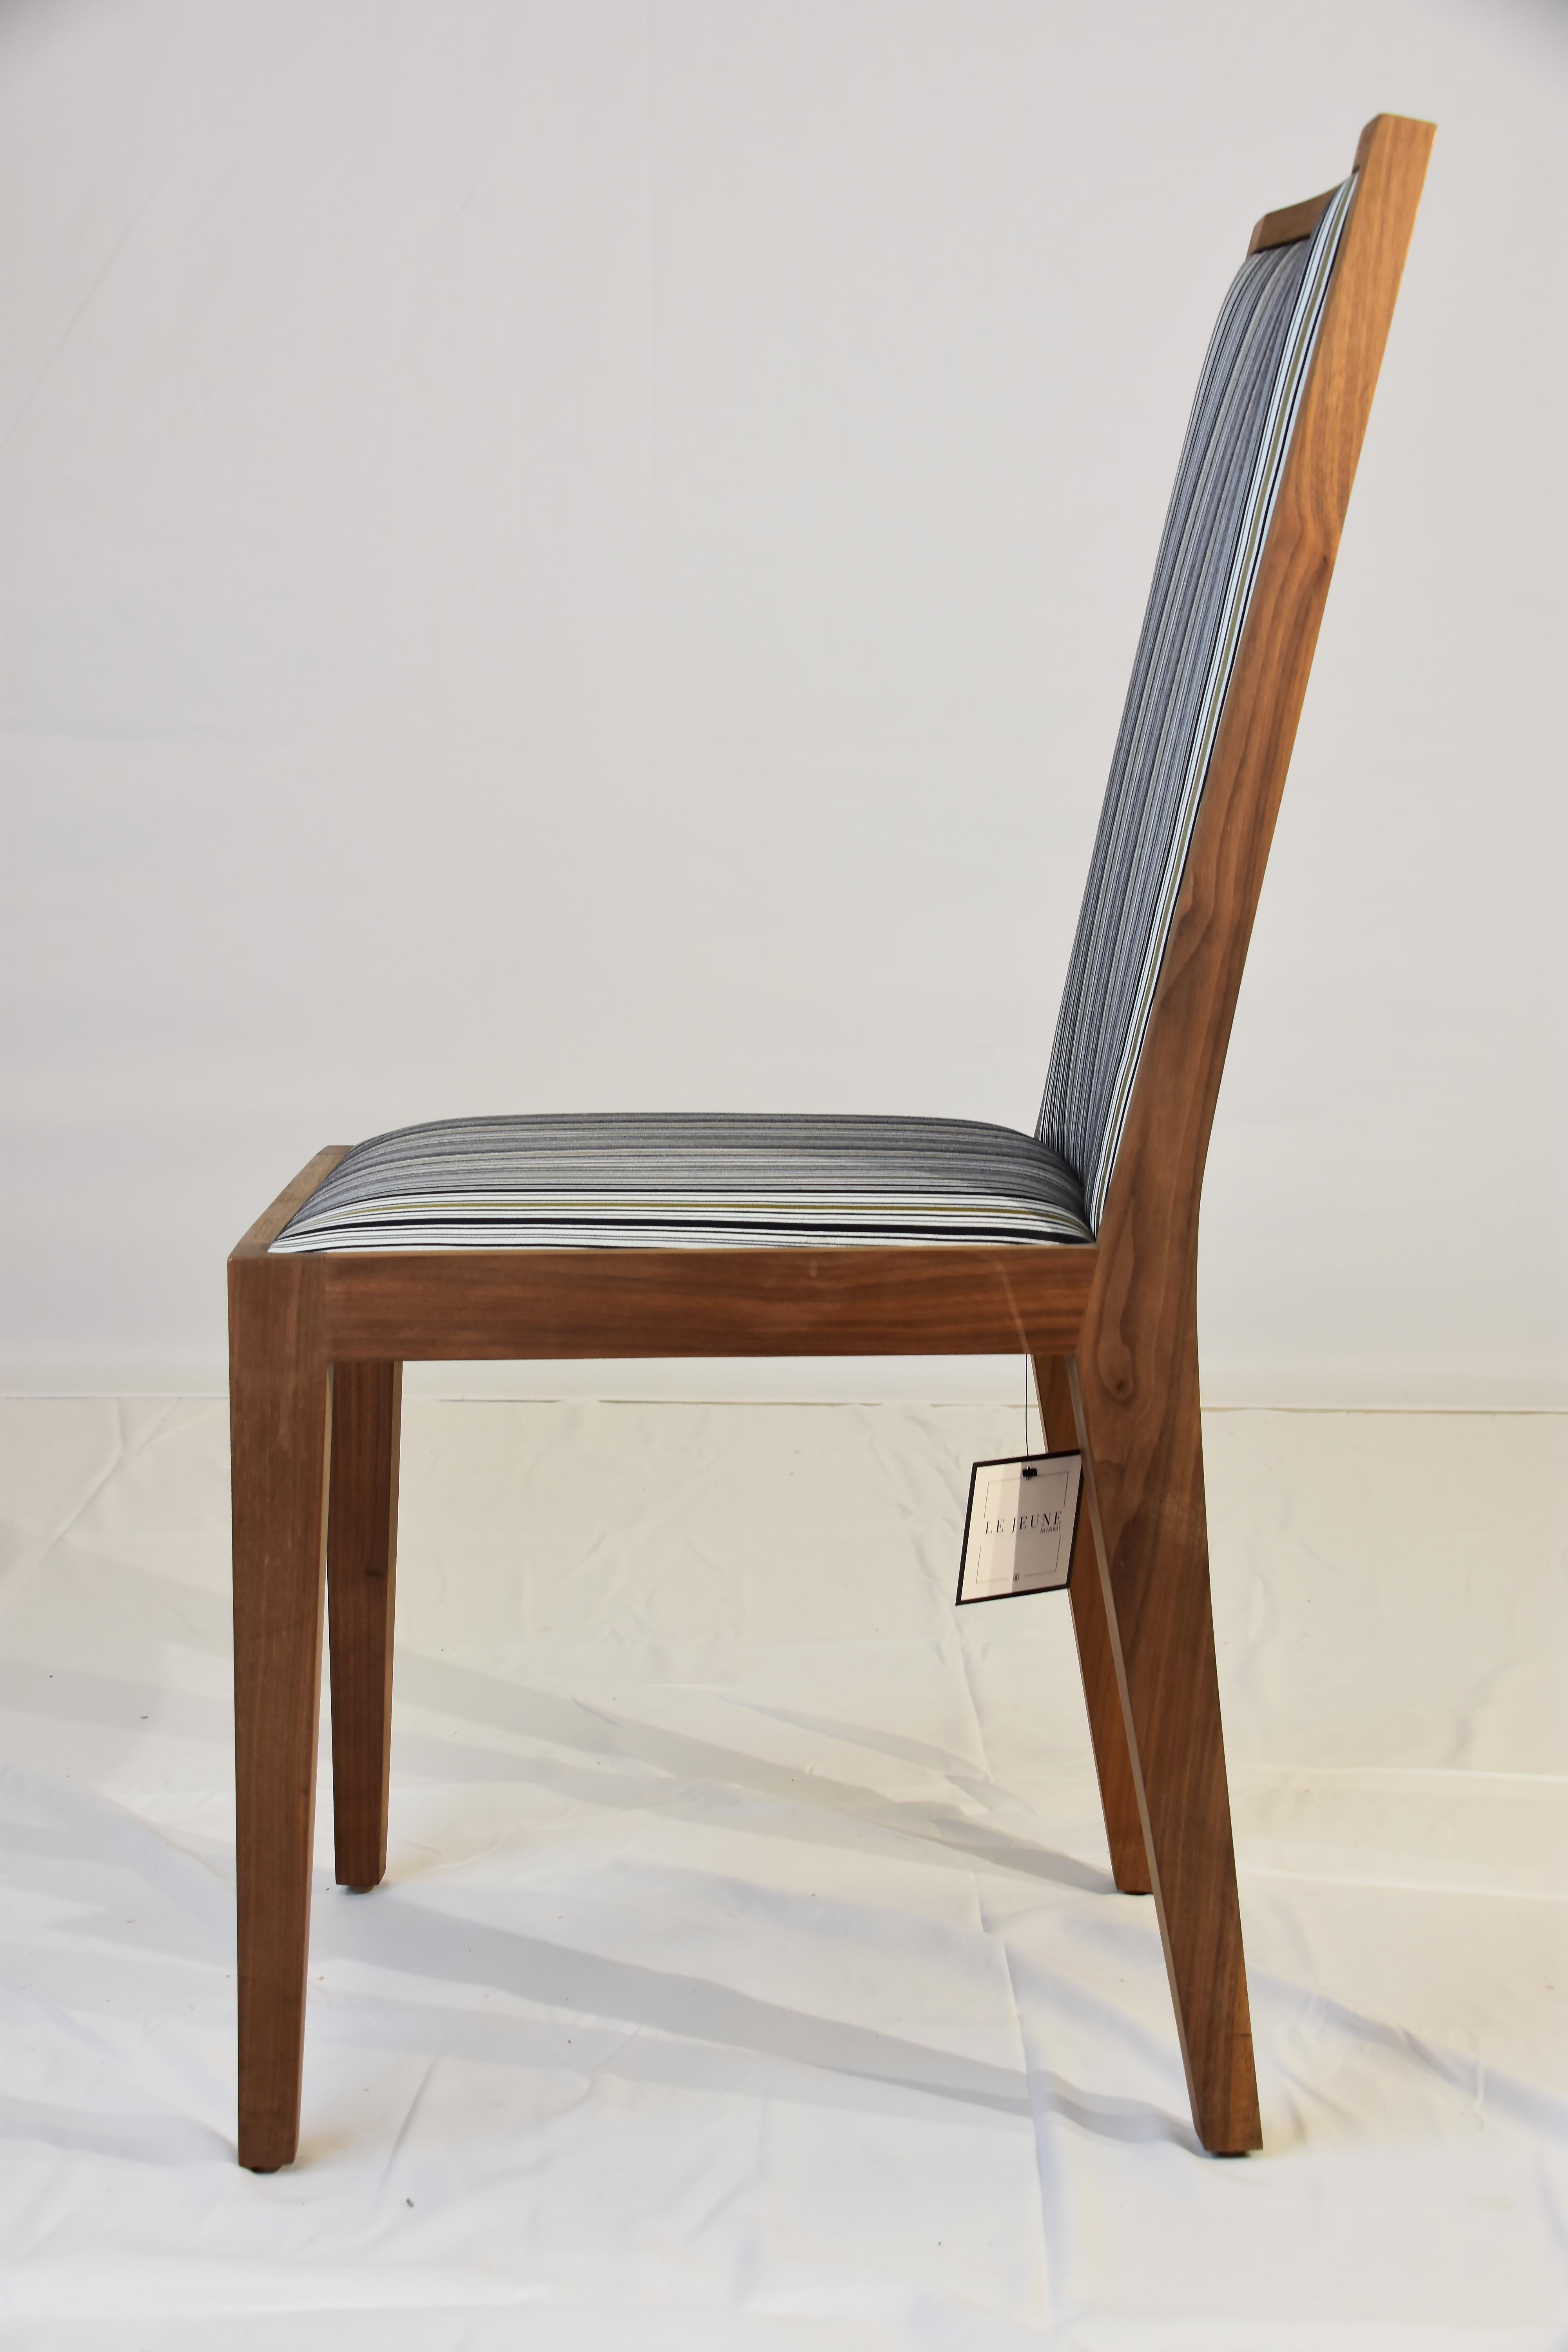 Modern Le Jeune Upholstery Antonella Walnut  Dining Chair Showroom Model For Sale